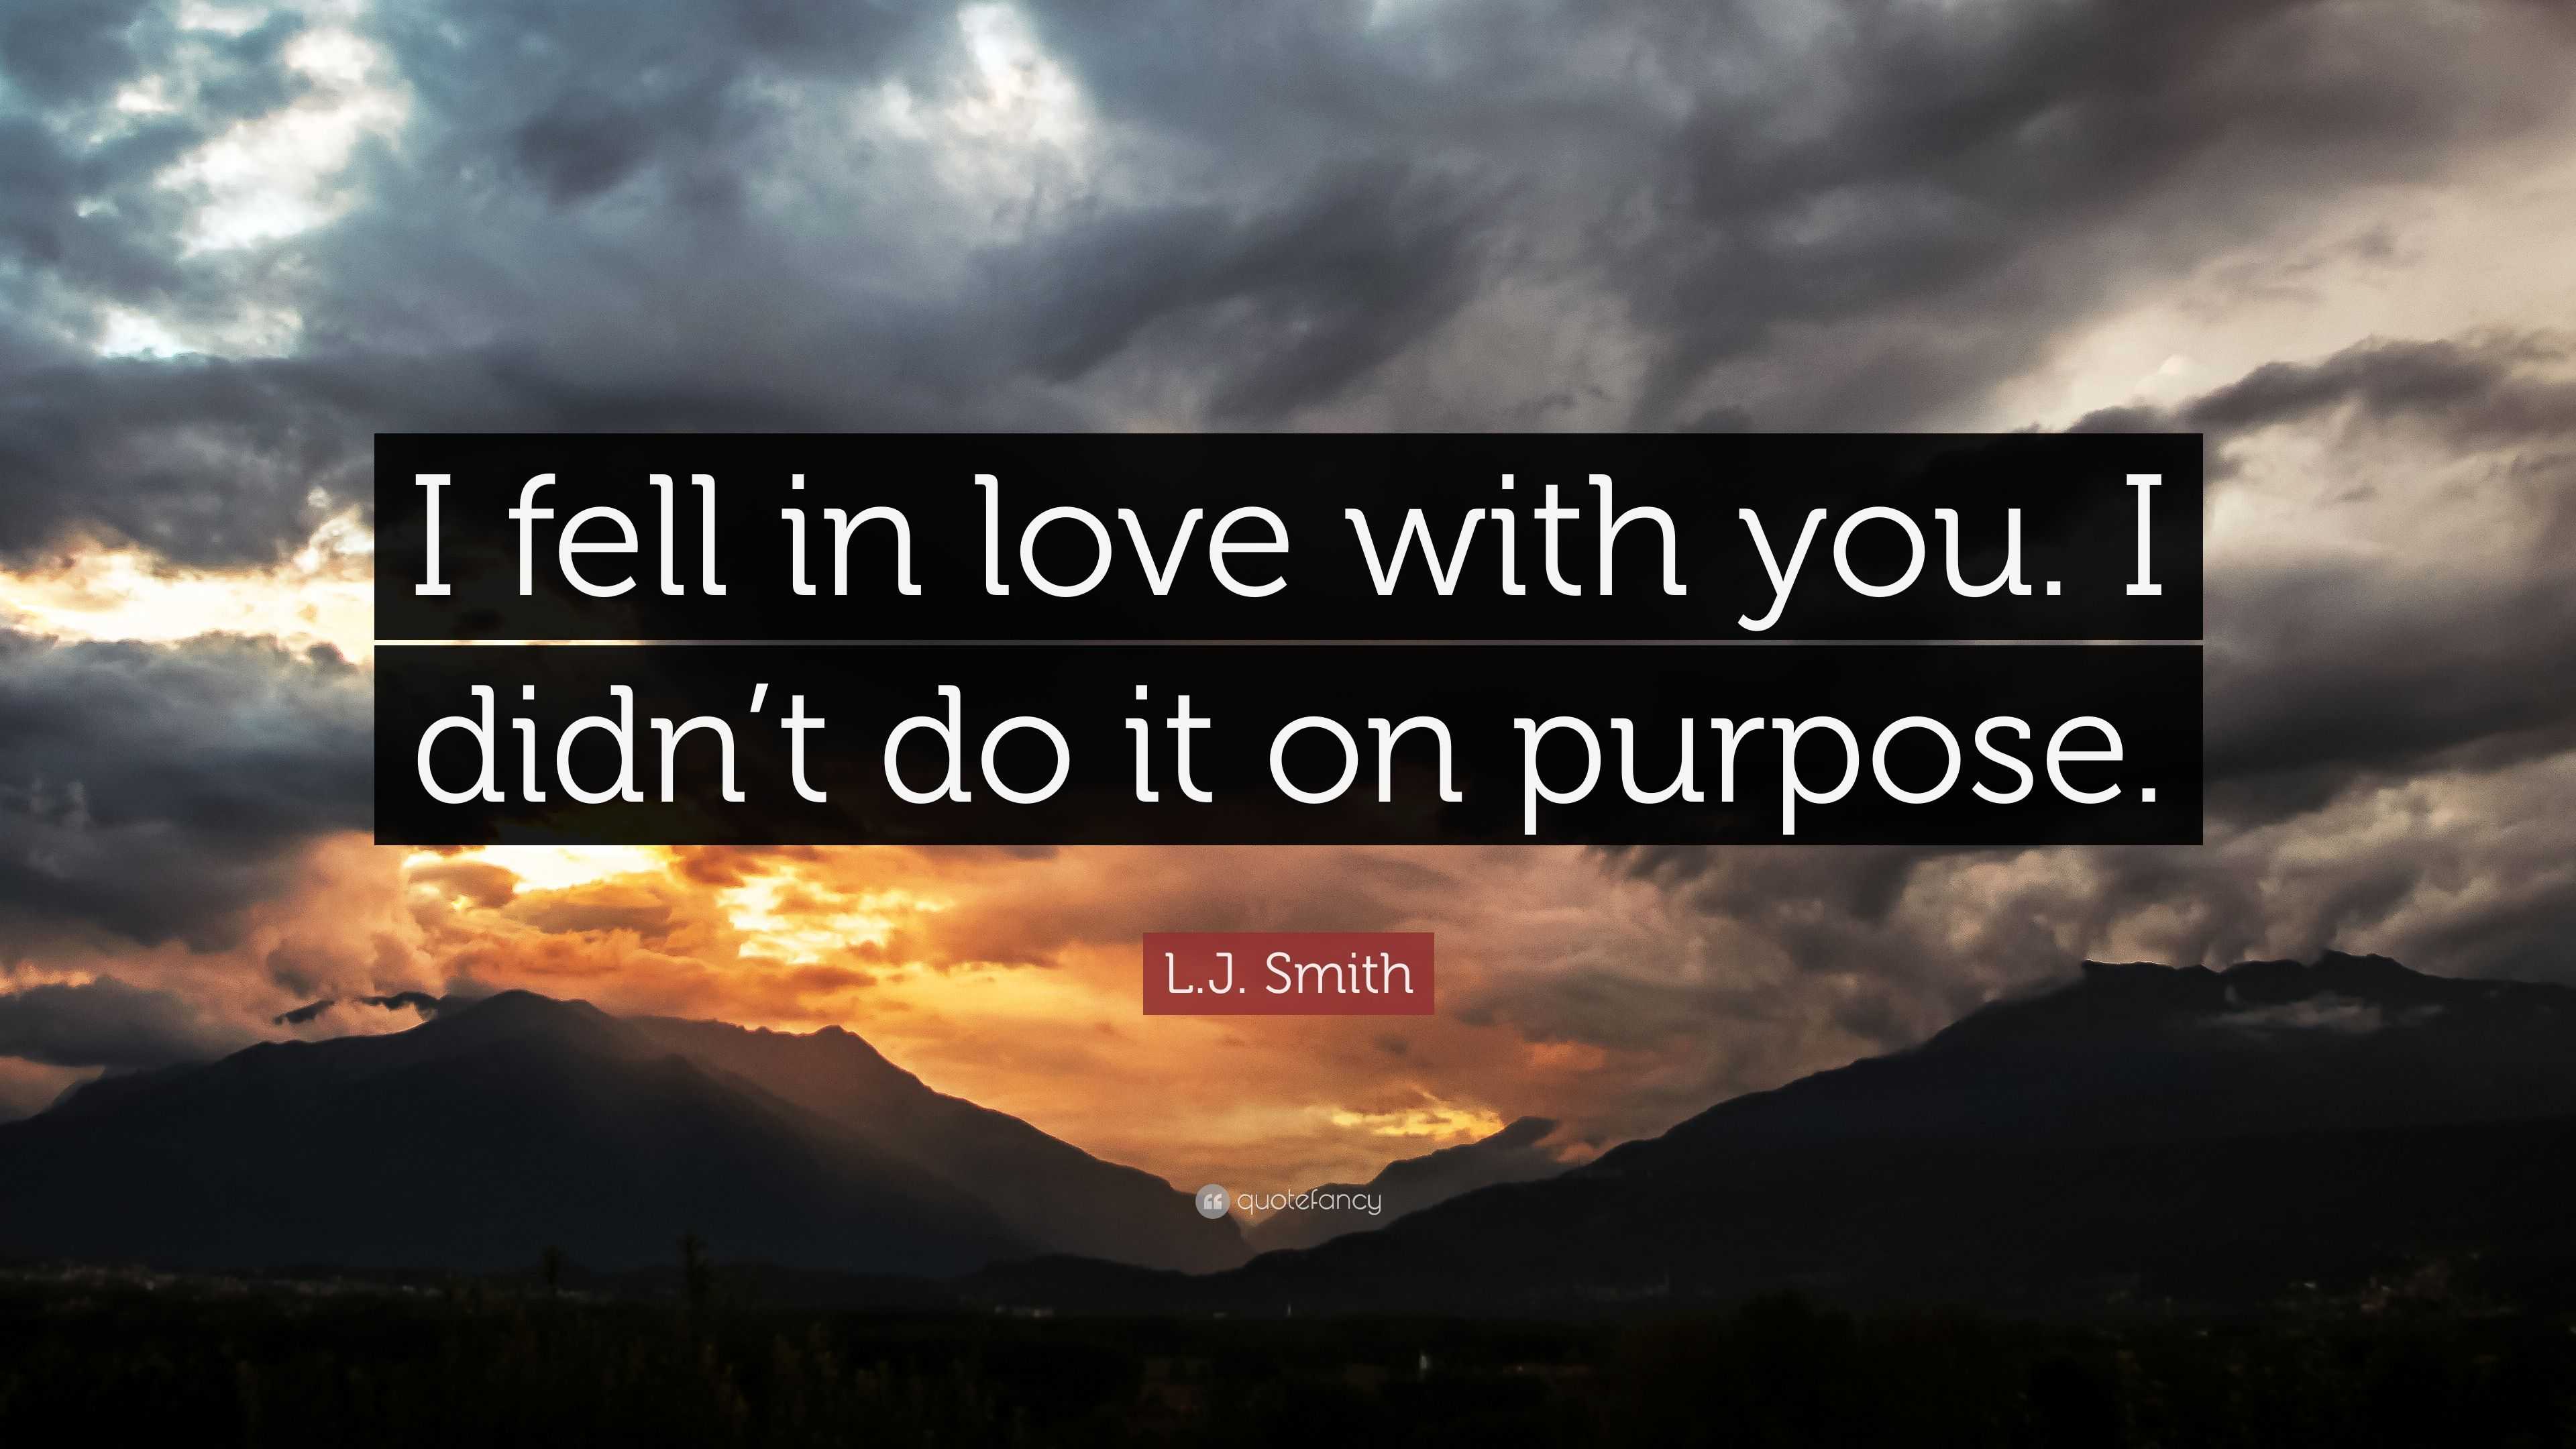 L.J. Smith Quote: "I fell in love with you. I didn't do it on purpose." (7 wallpapers) - Quotefancy